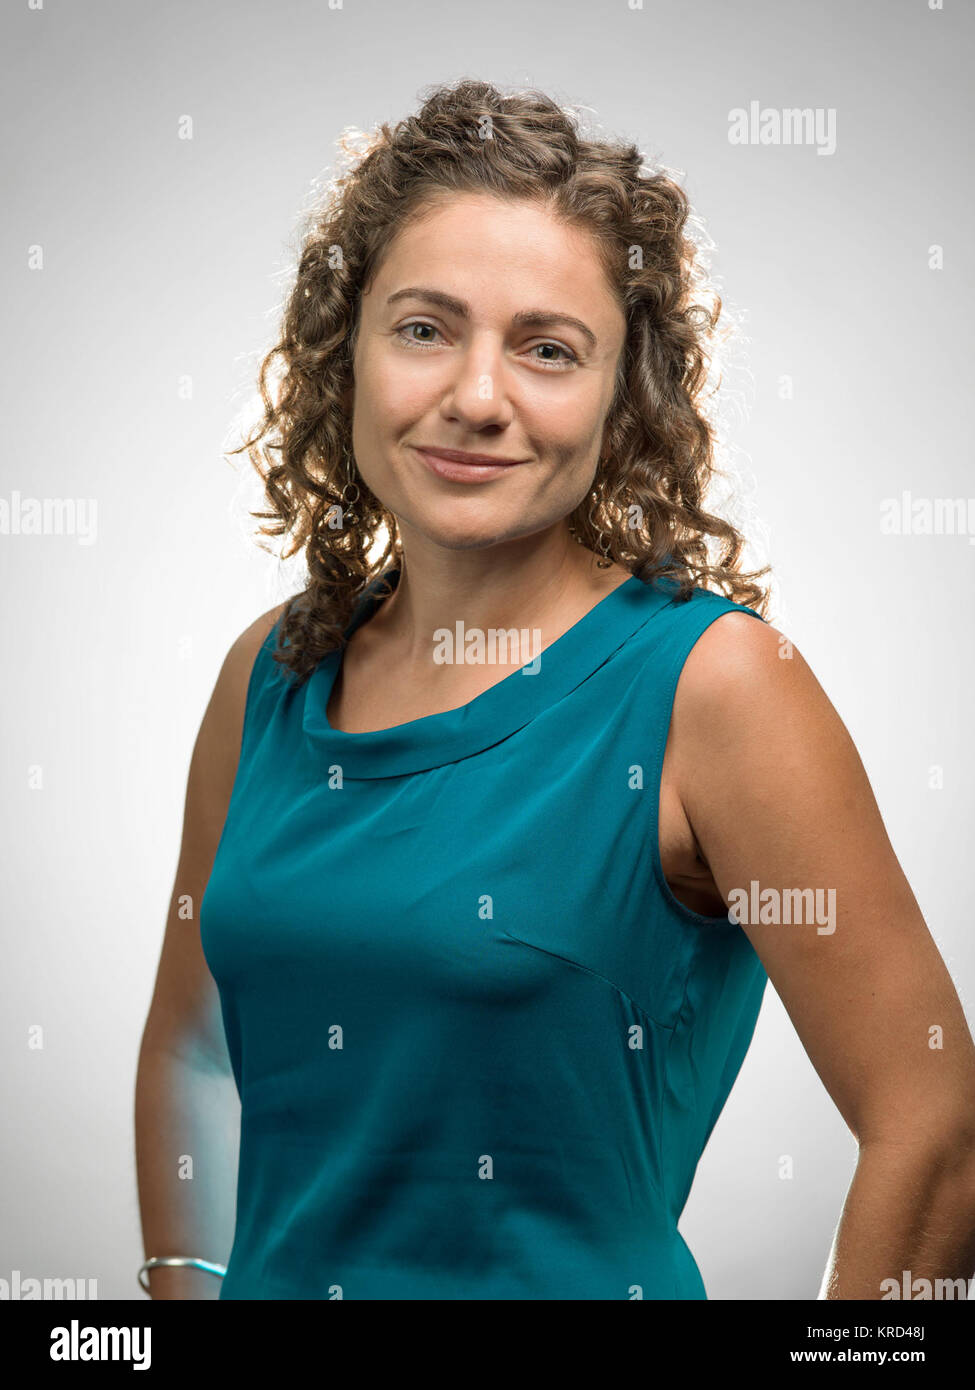 Portrait of new astronaut candidate Jessica U. Meir, Ph.D., for media event.  Photo Date: August 14, 2013.  Location: Building 8, Room 183 - Photo Studio.  Photographer: Robert Markowitz Jessica U. Meir portrait for media event Stock Photo